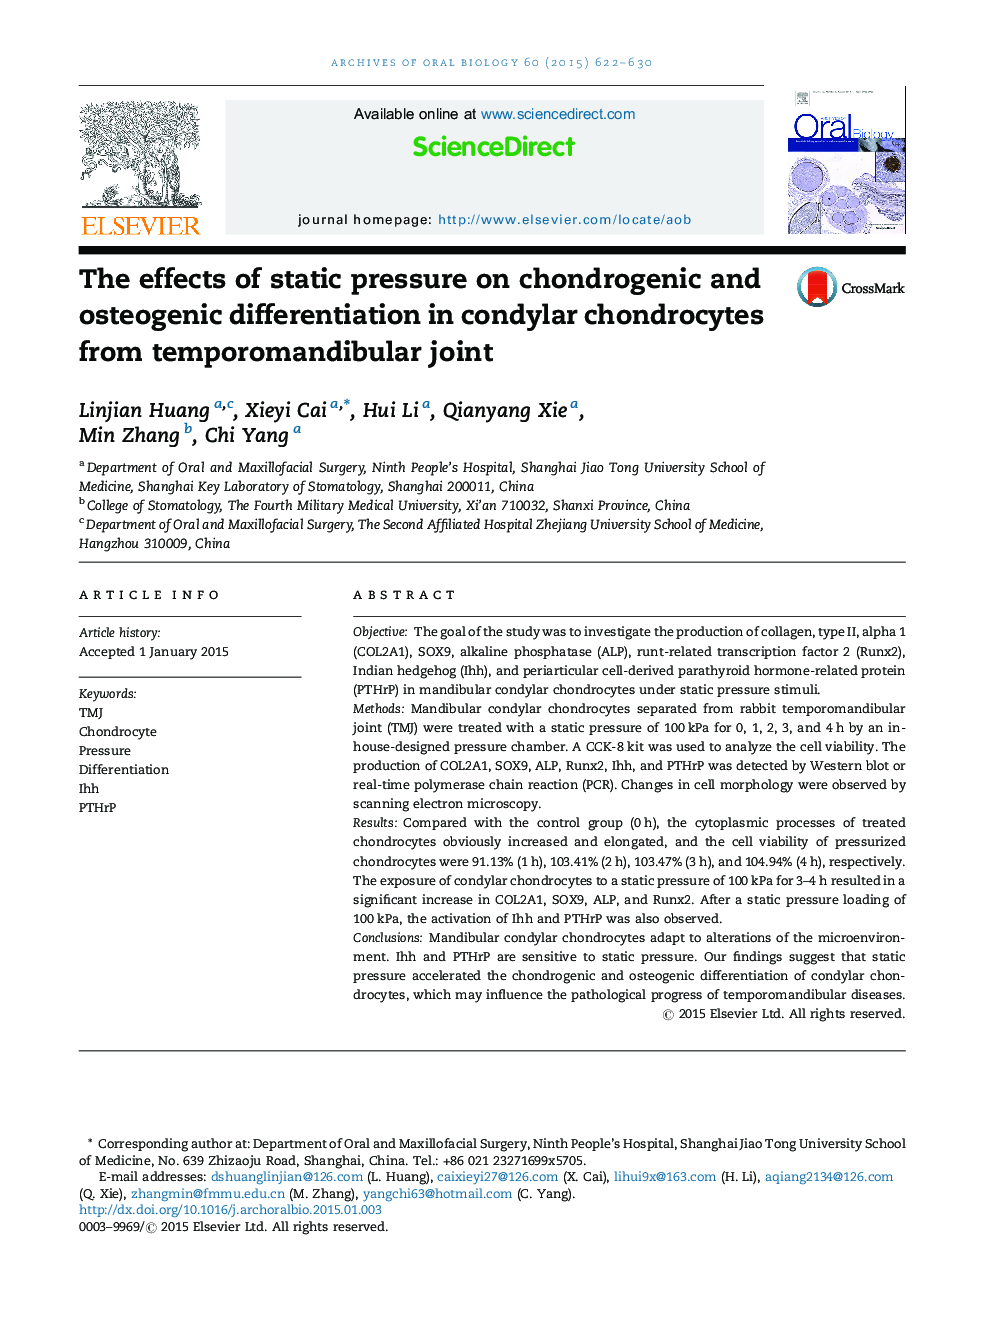 The effects of static pressure on chondrogenic and osteogenic differentiation in condylar chondrocytes from temporomandibular joint